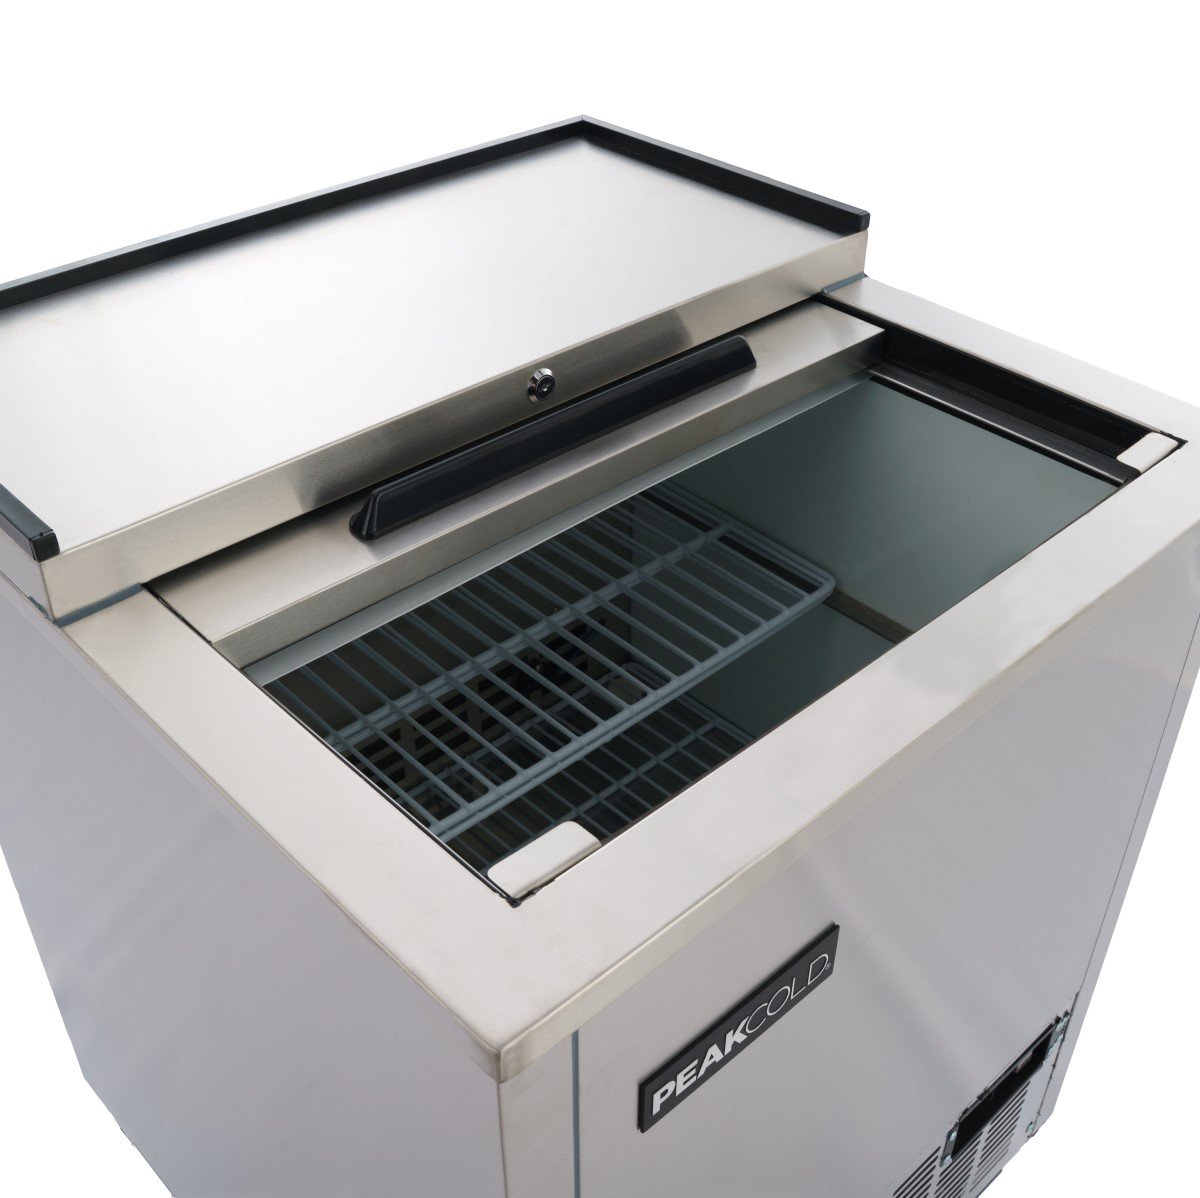 PeakCold Glass Froster Back Bar Freezer - Stainless Steel